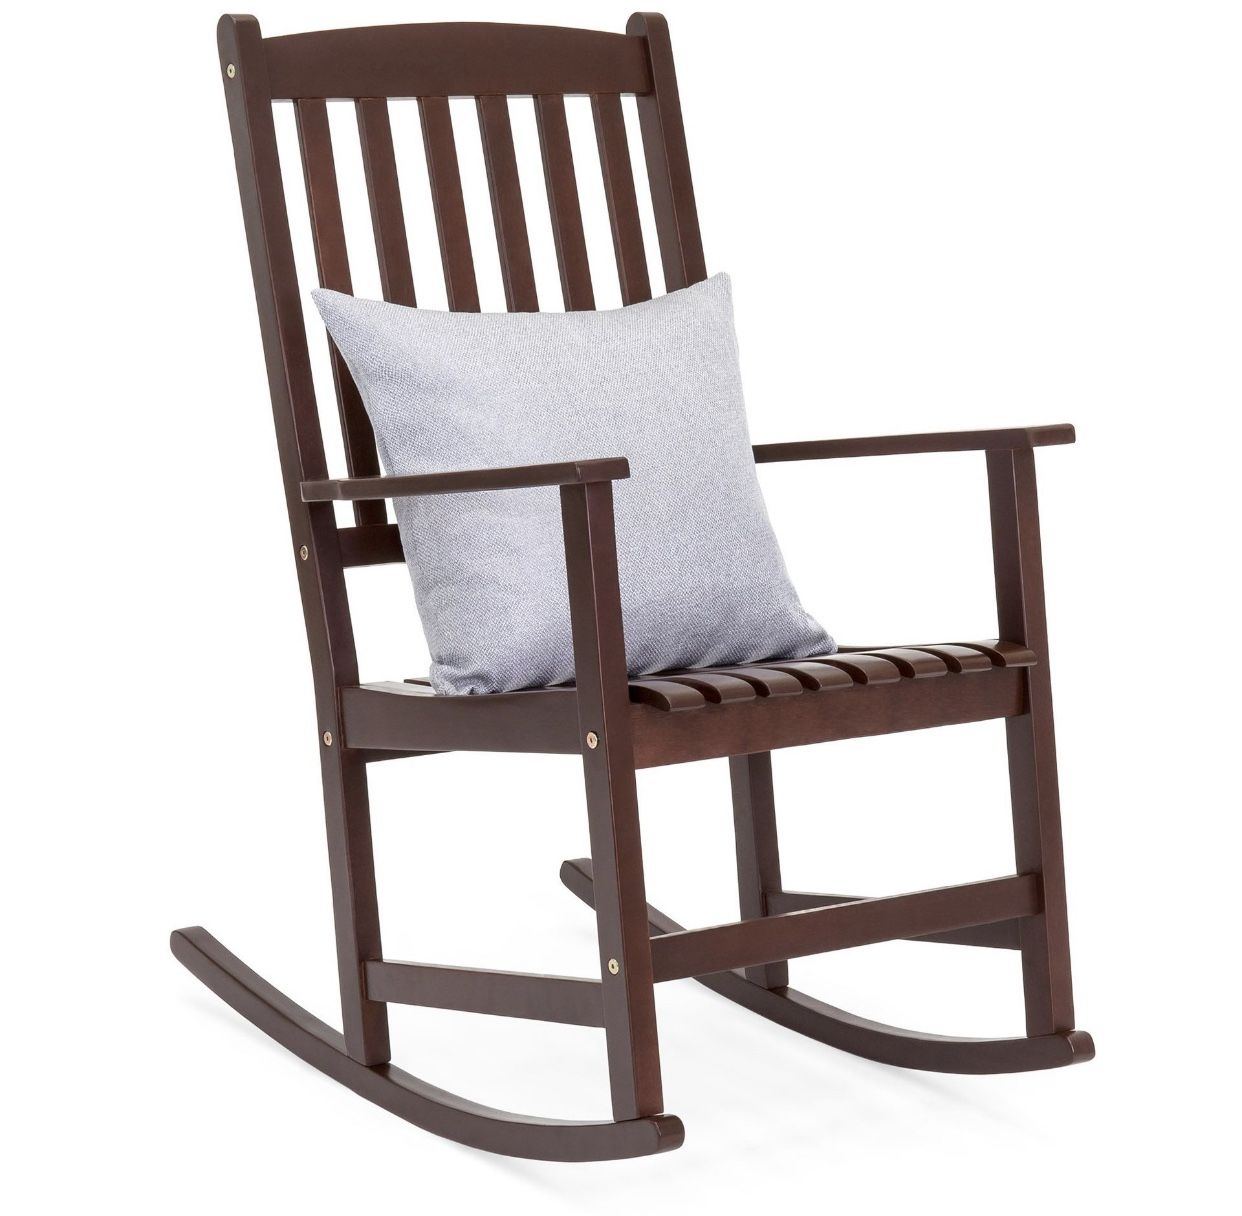 Traditional Wooden Rocking Chair